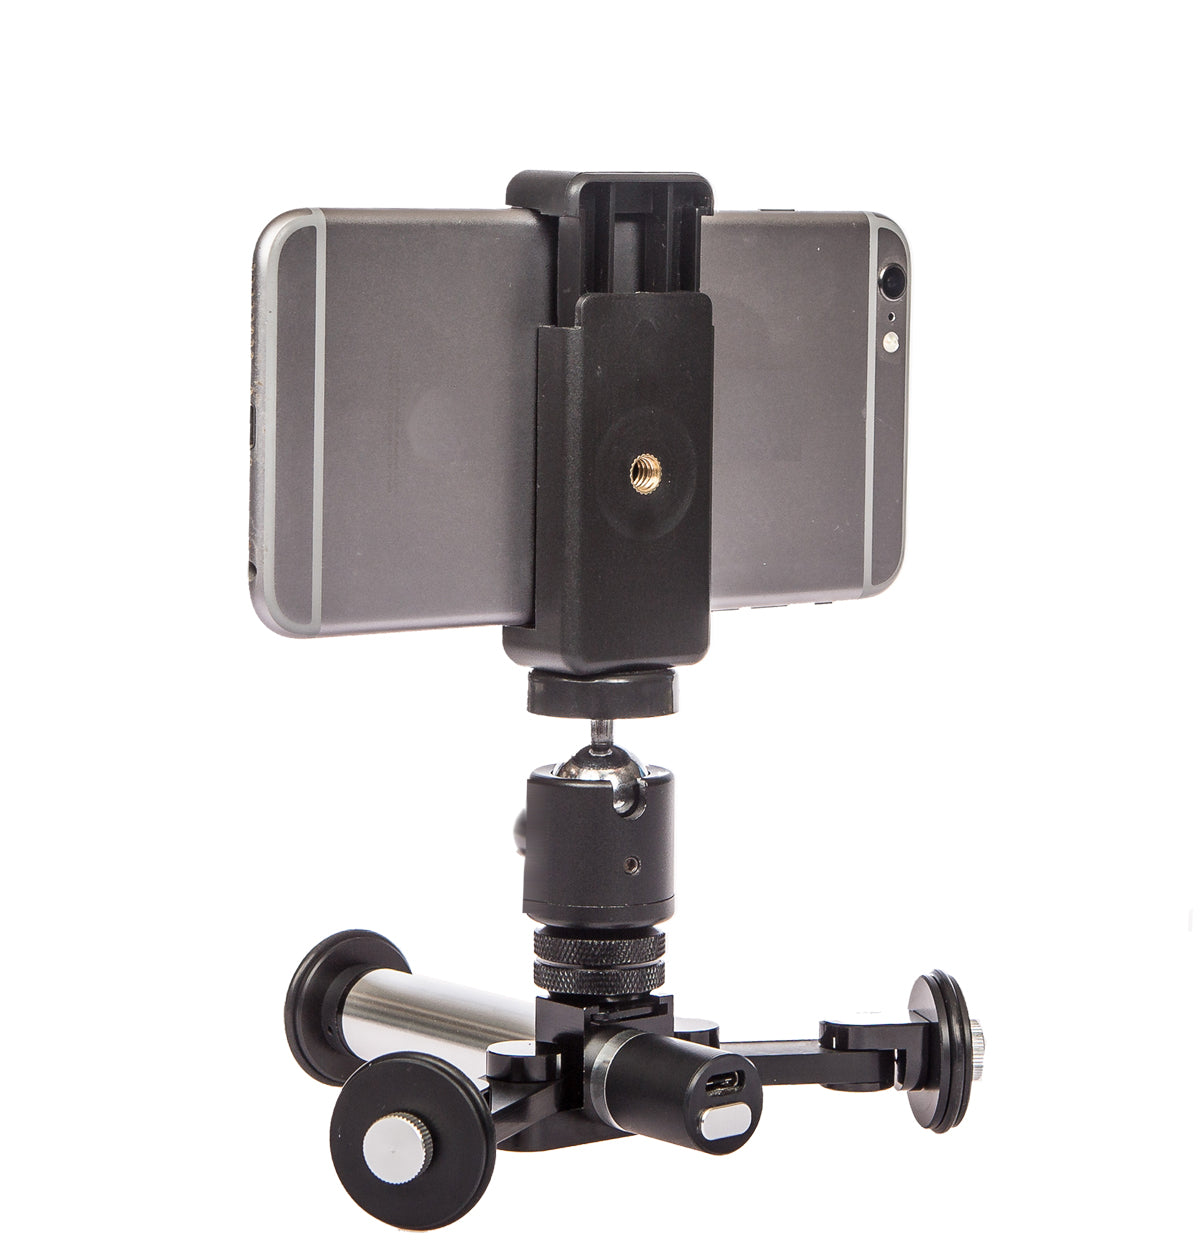 Rollocam H-2 - Face Following intelligent, portable tripod for SmartPhones and small cameras